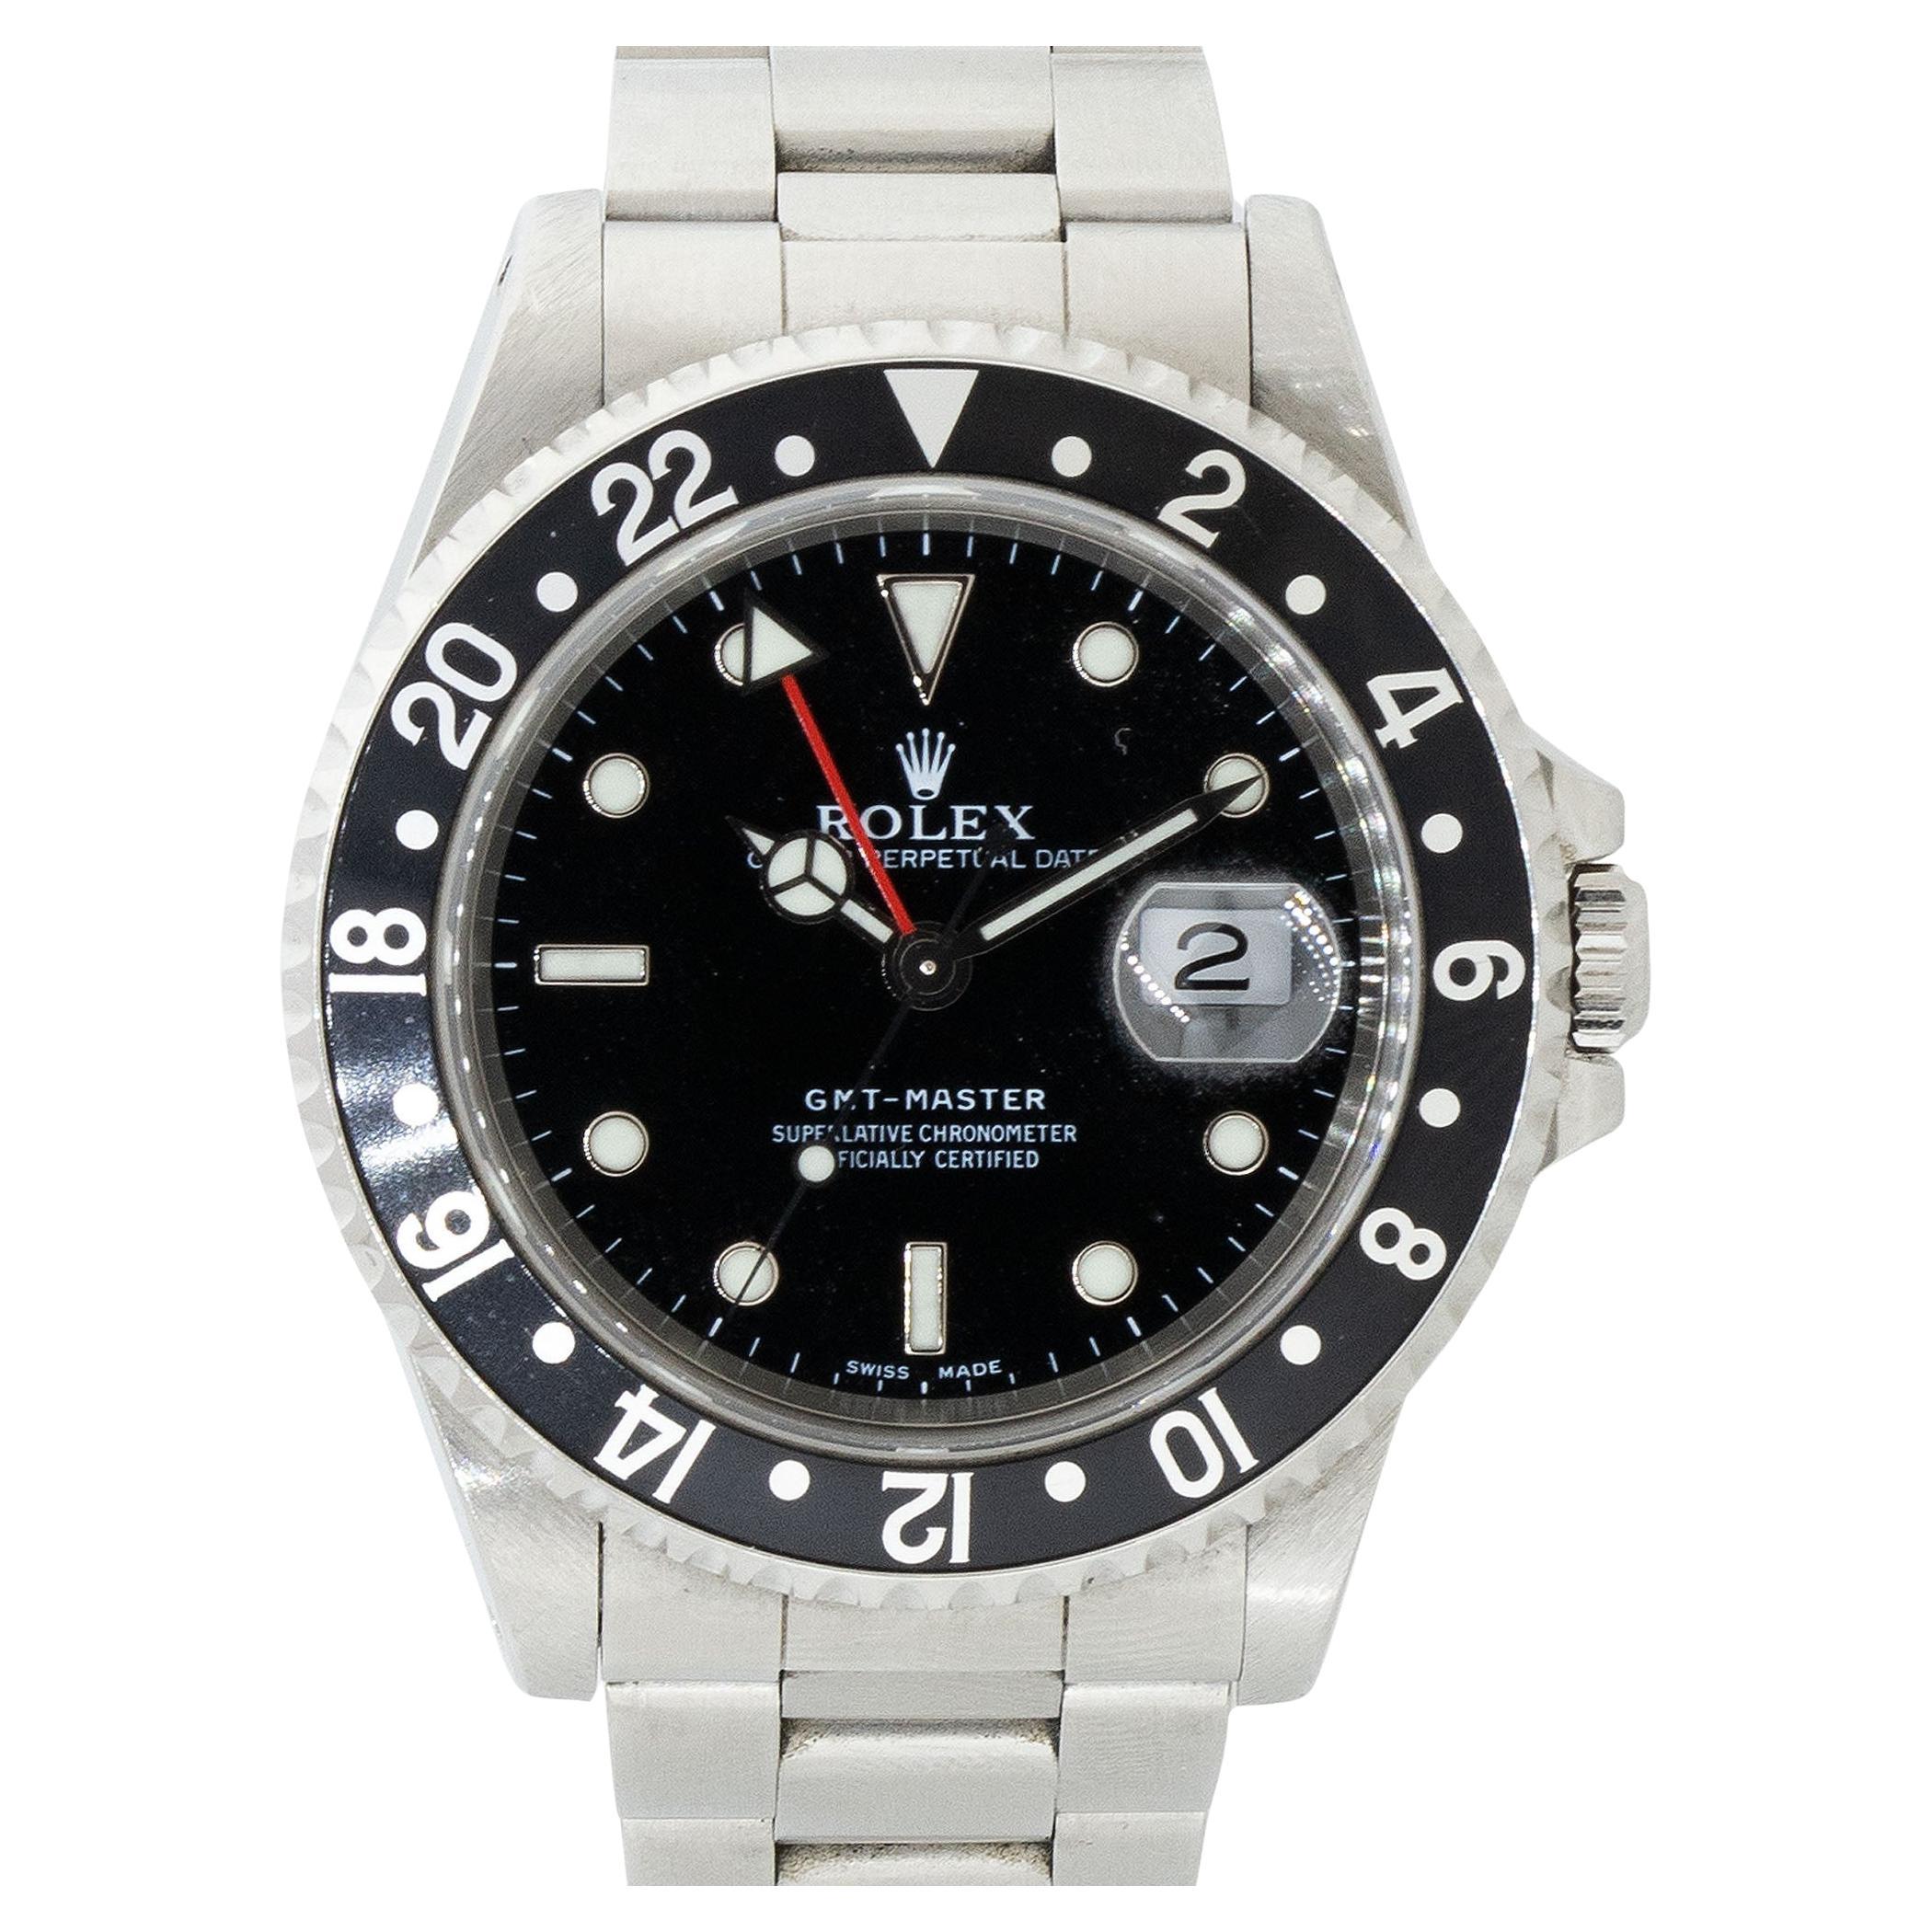 Rolex 16700 GMT-Master Stainless Steel Black Dial Watch For Sale